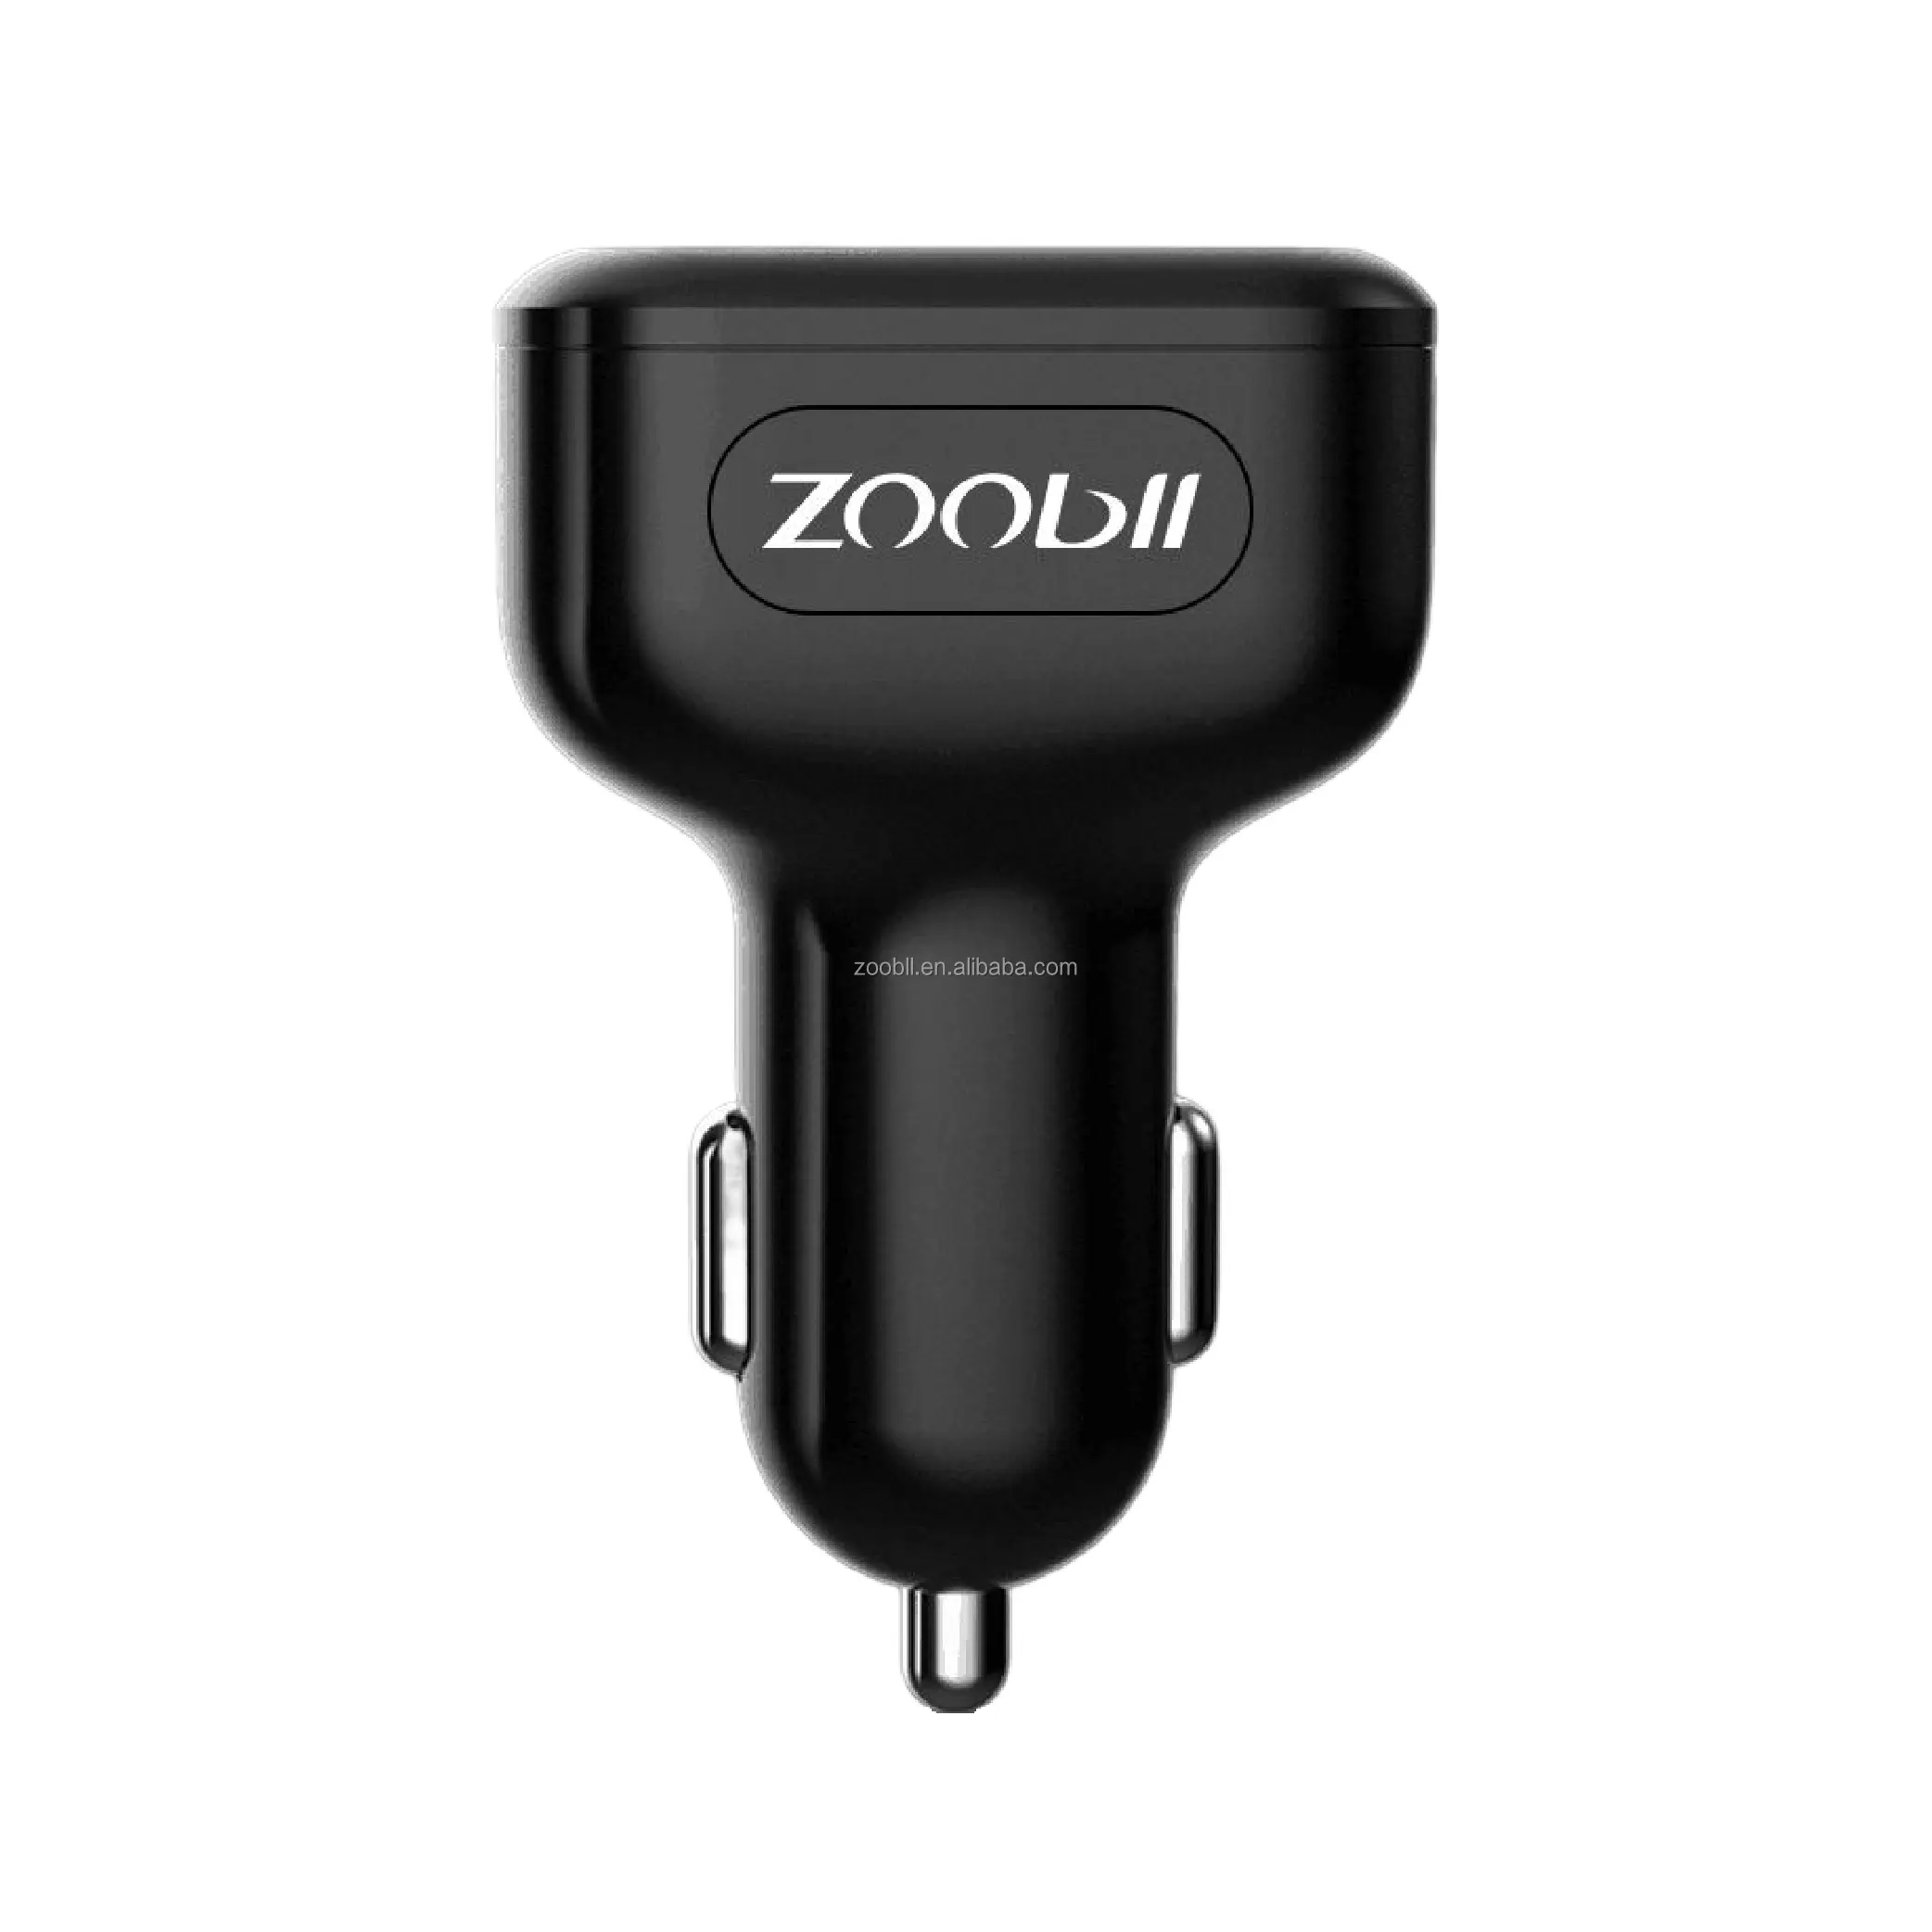 ZOOBII D6 charge de voiture Plug and Play Obd Tracker véhicule GSM LTE GPS tracker voiture 4g Beidou GPS voiture de location